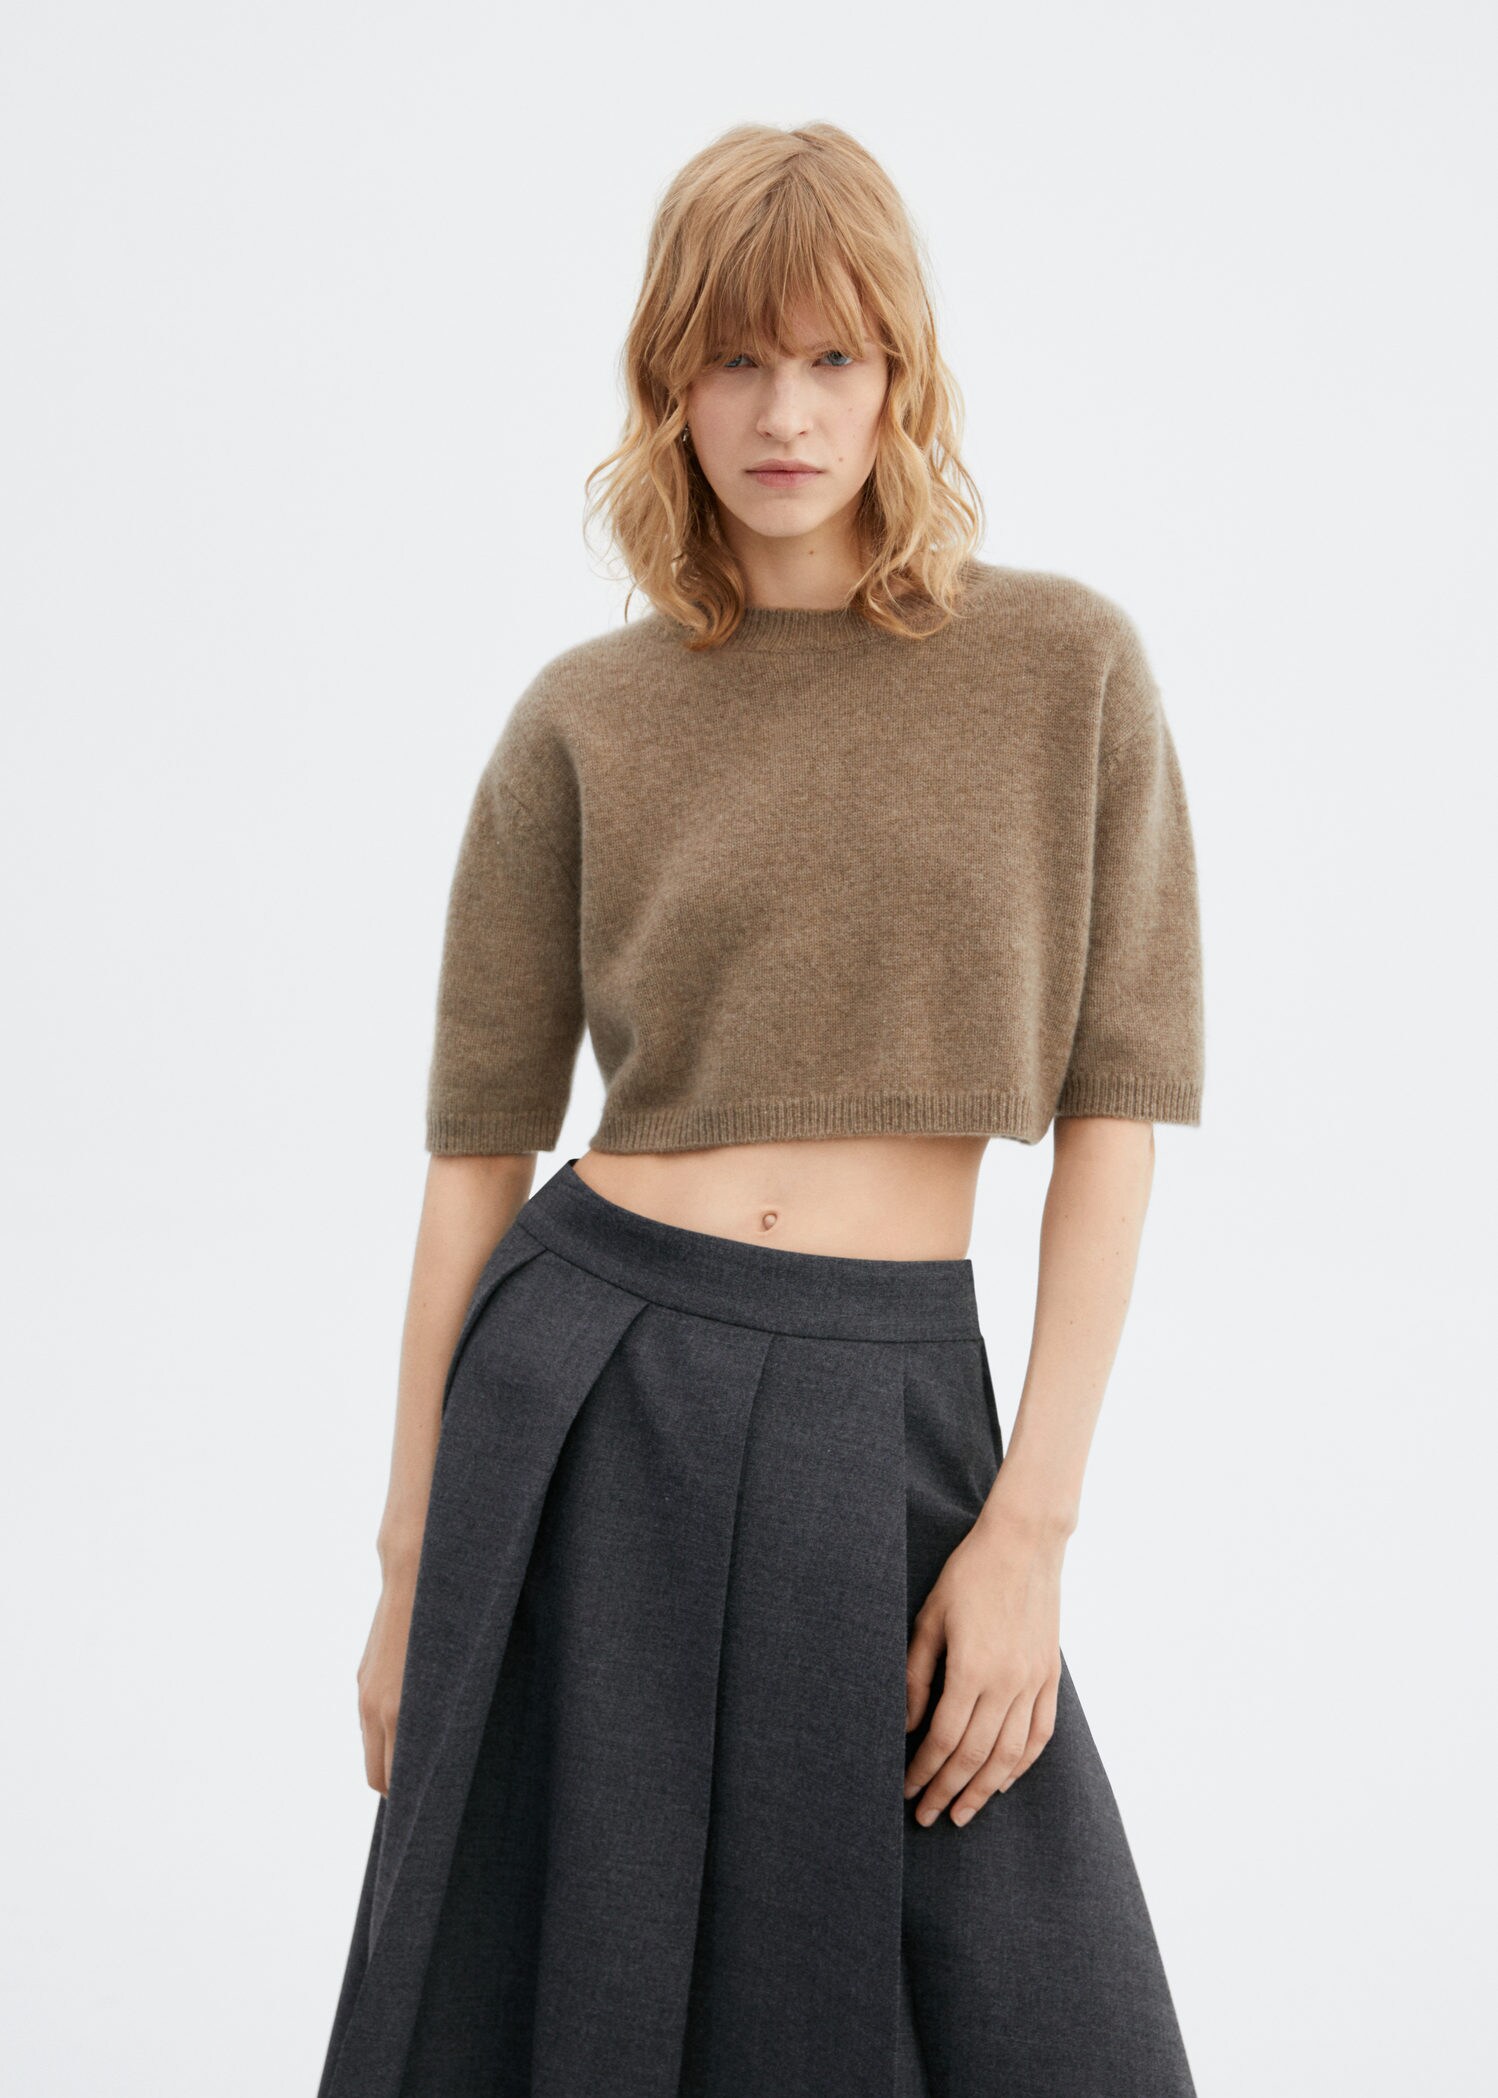 Cropped cashmere sweater